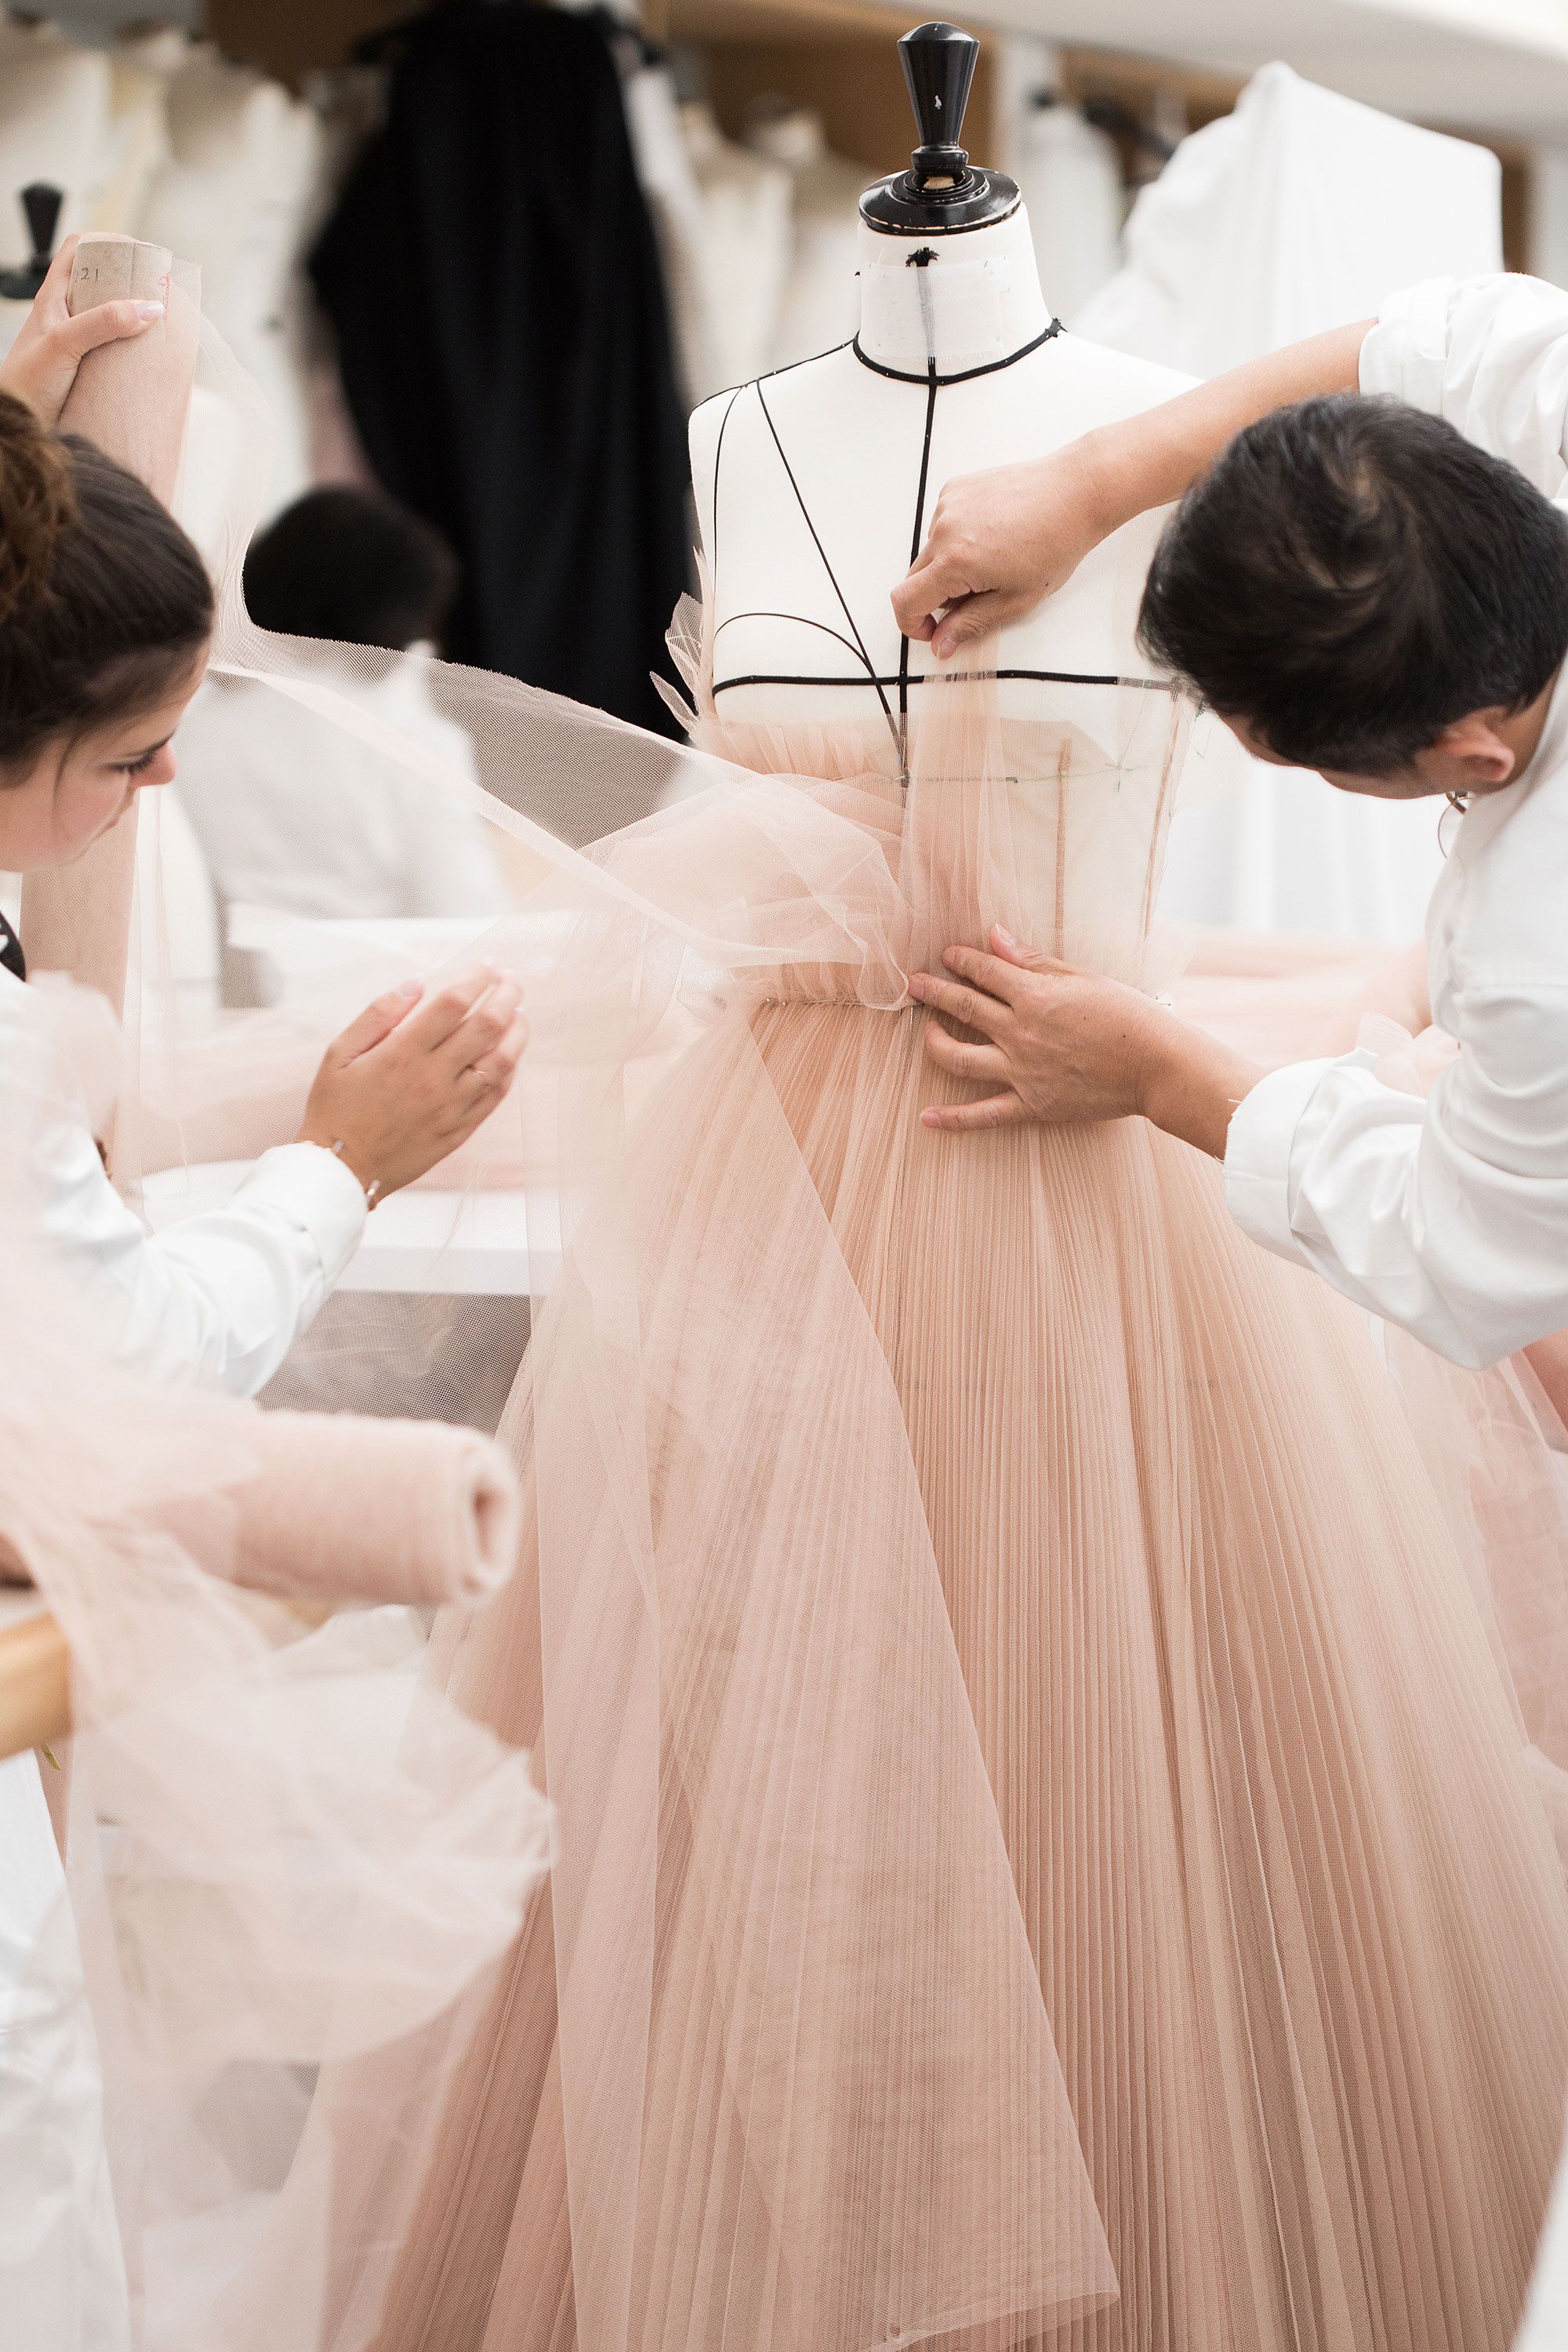 Dior Designed Ballet Costumes With Works & Process - Coveteur: Inside  Closets, Fashion, Beauty, Health, and Travel